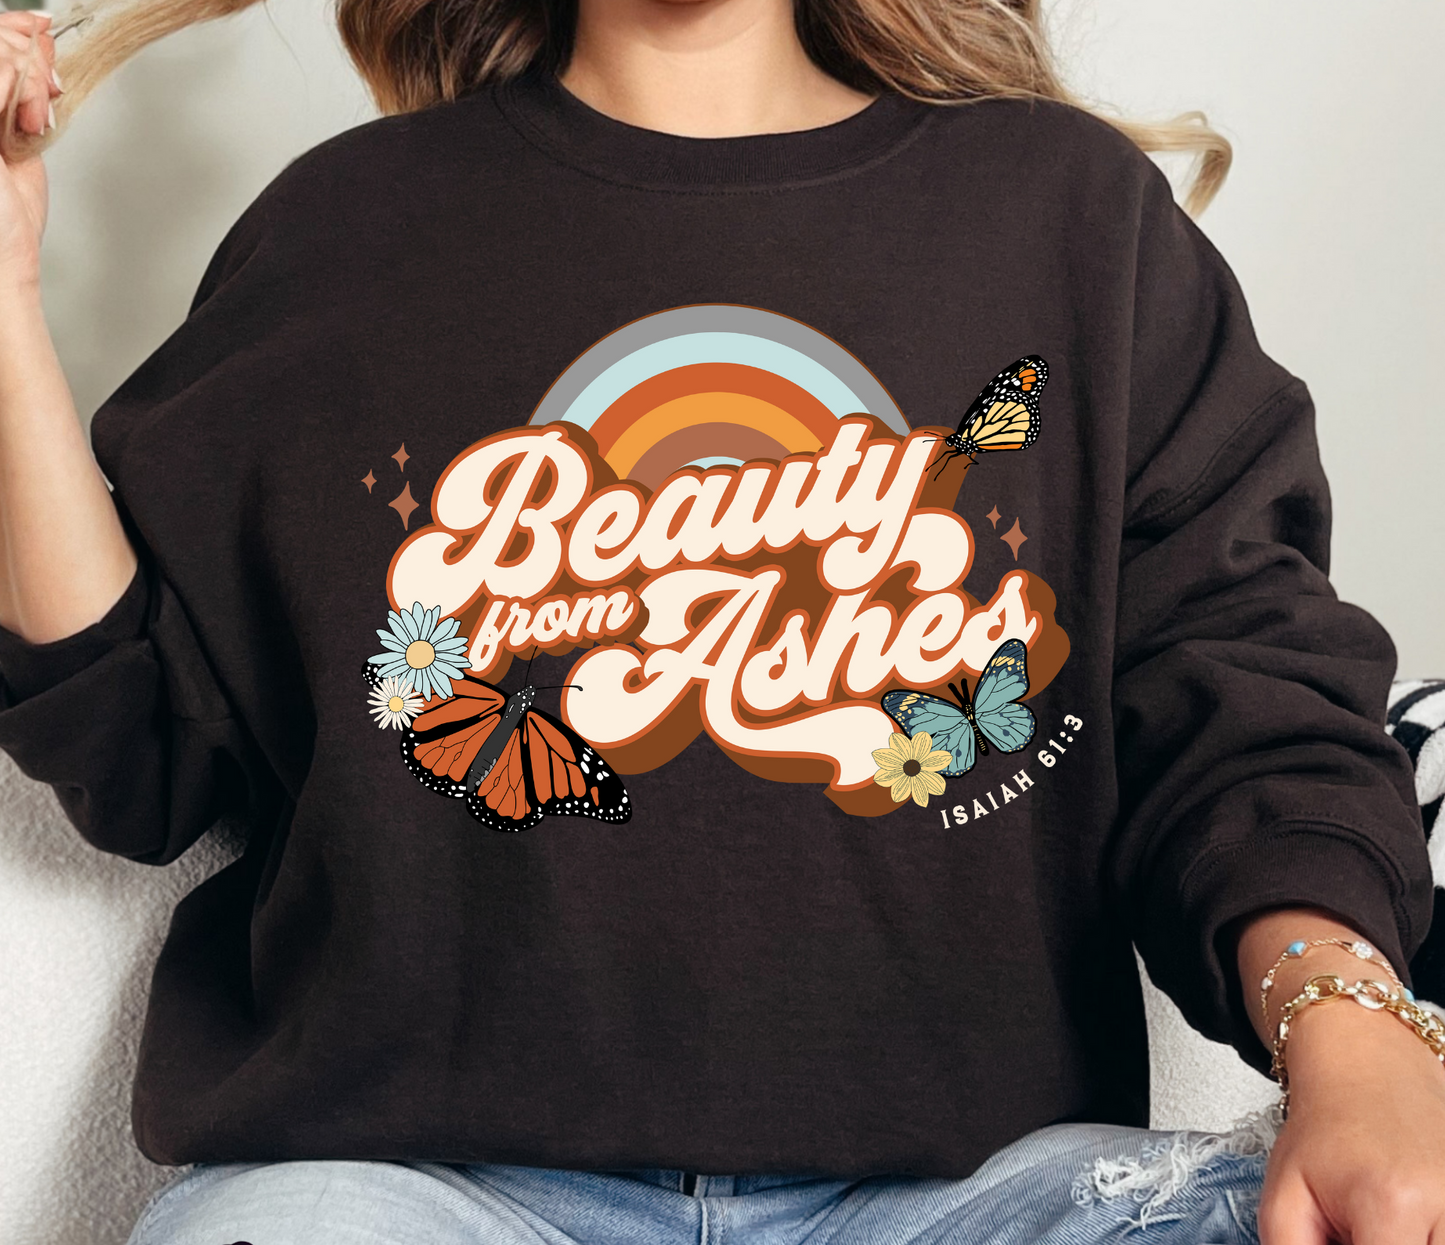 Christian Sweatshirt-Beauty from Ashes-Butterfly